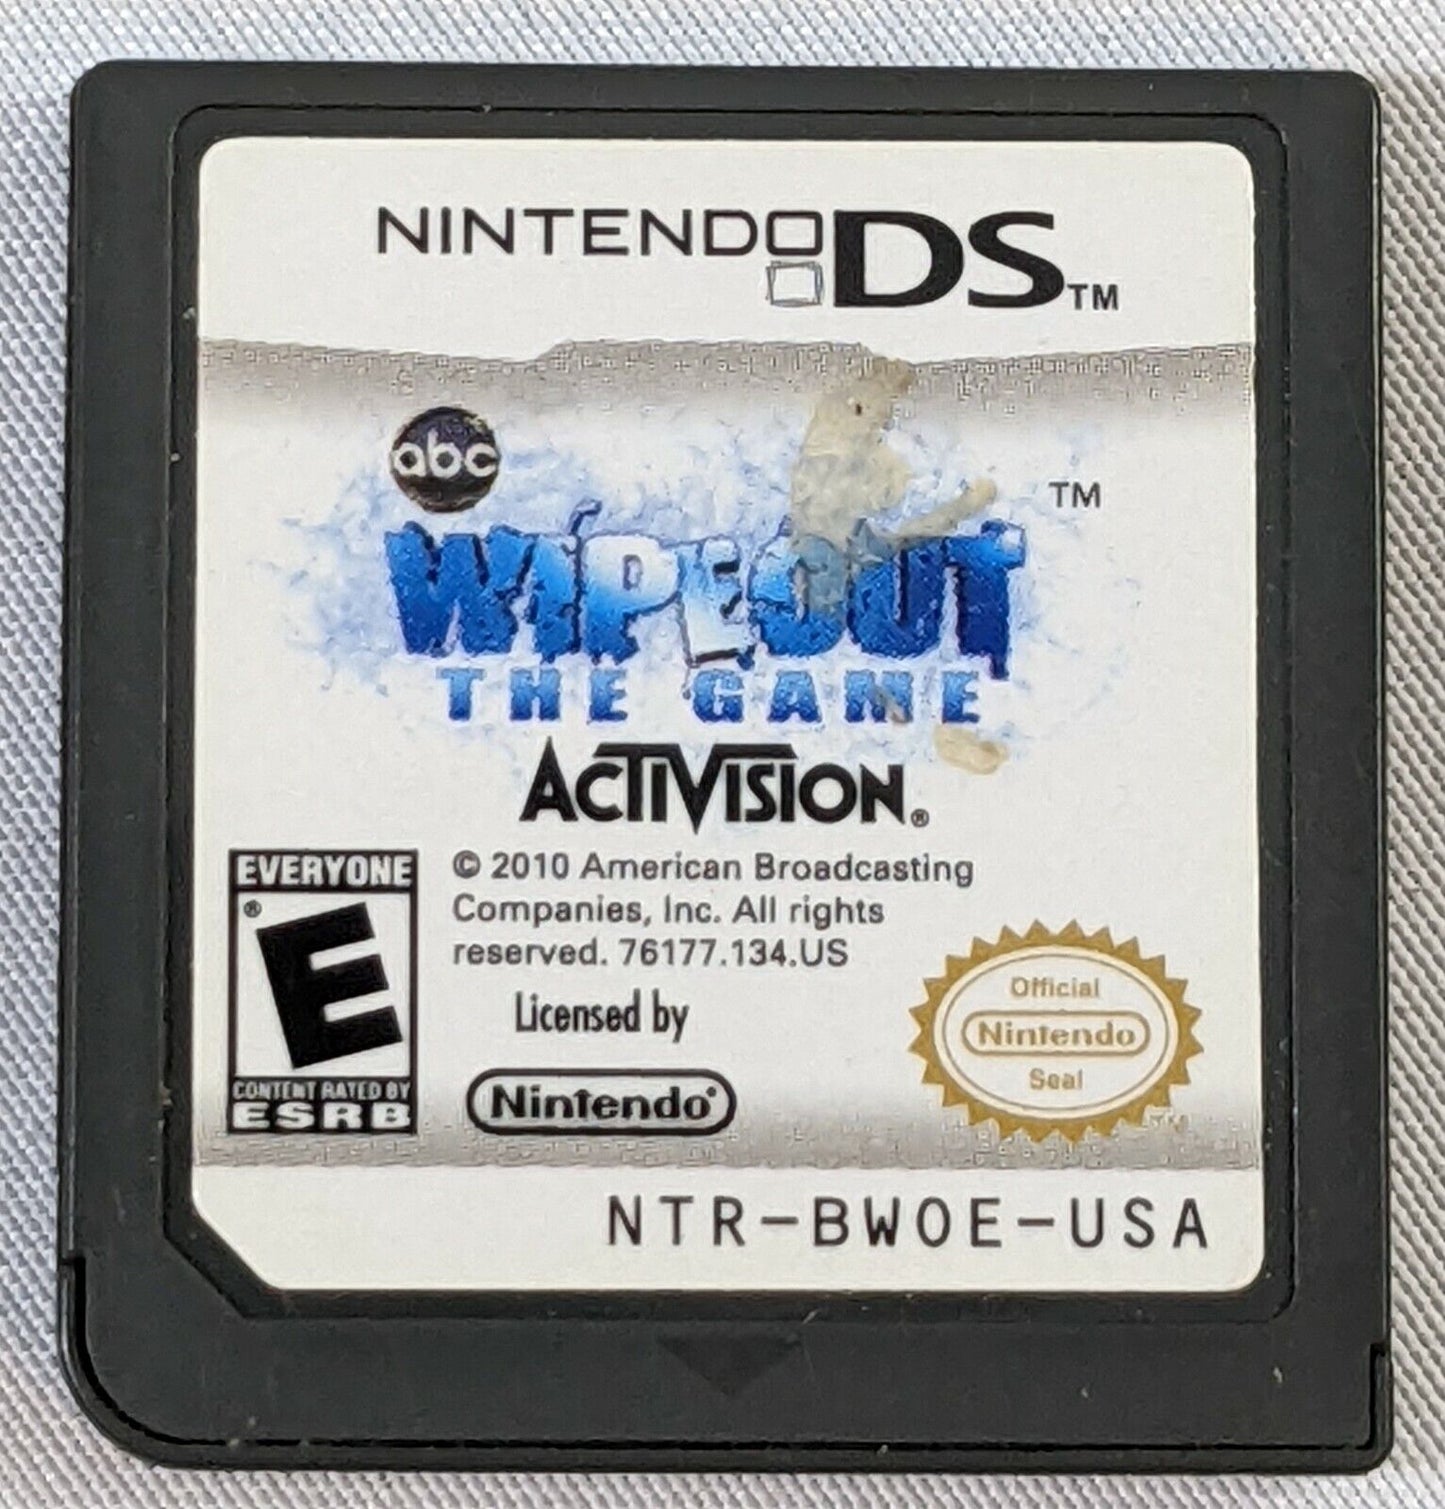 Nintendo DS NDS Wipeout The Game by Activision Video Game Cartridge Only!